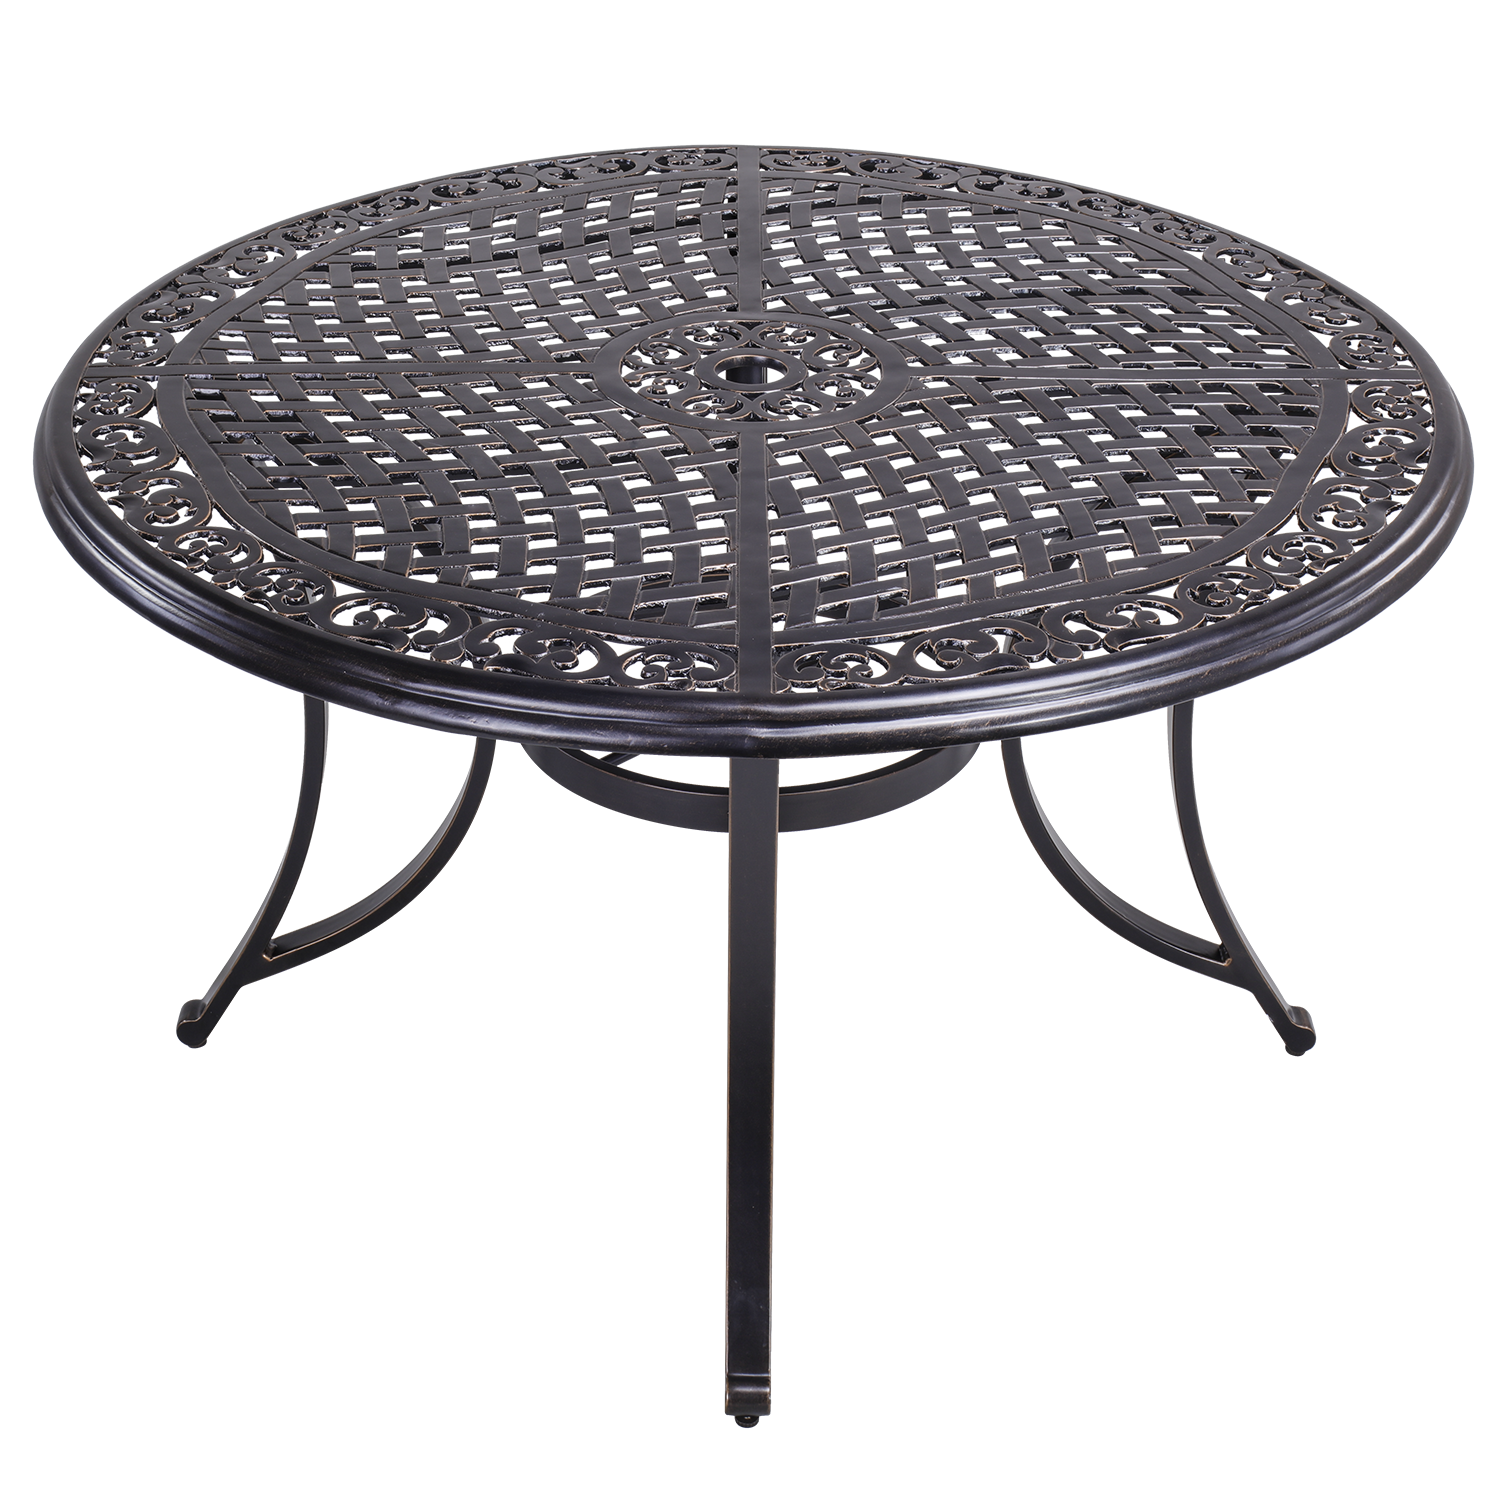 Mondawe Round Outdoor Dining Table 482 In W X 482 In L With Umbrella